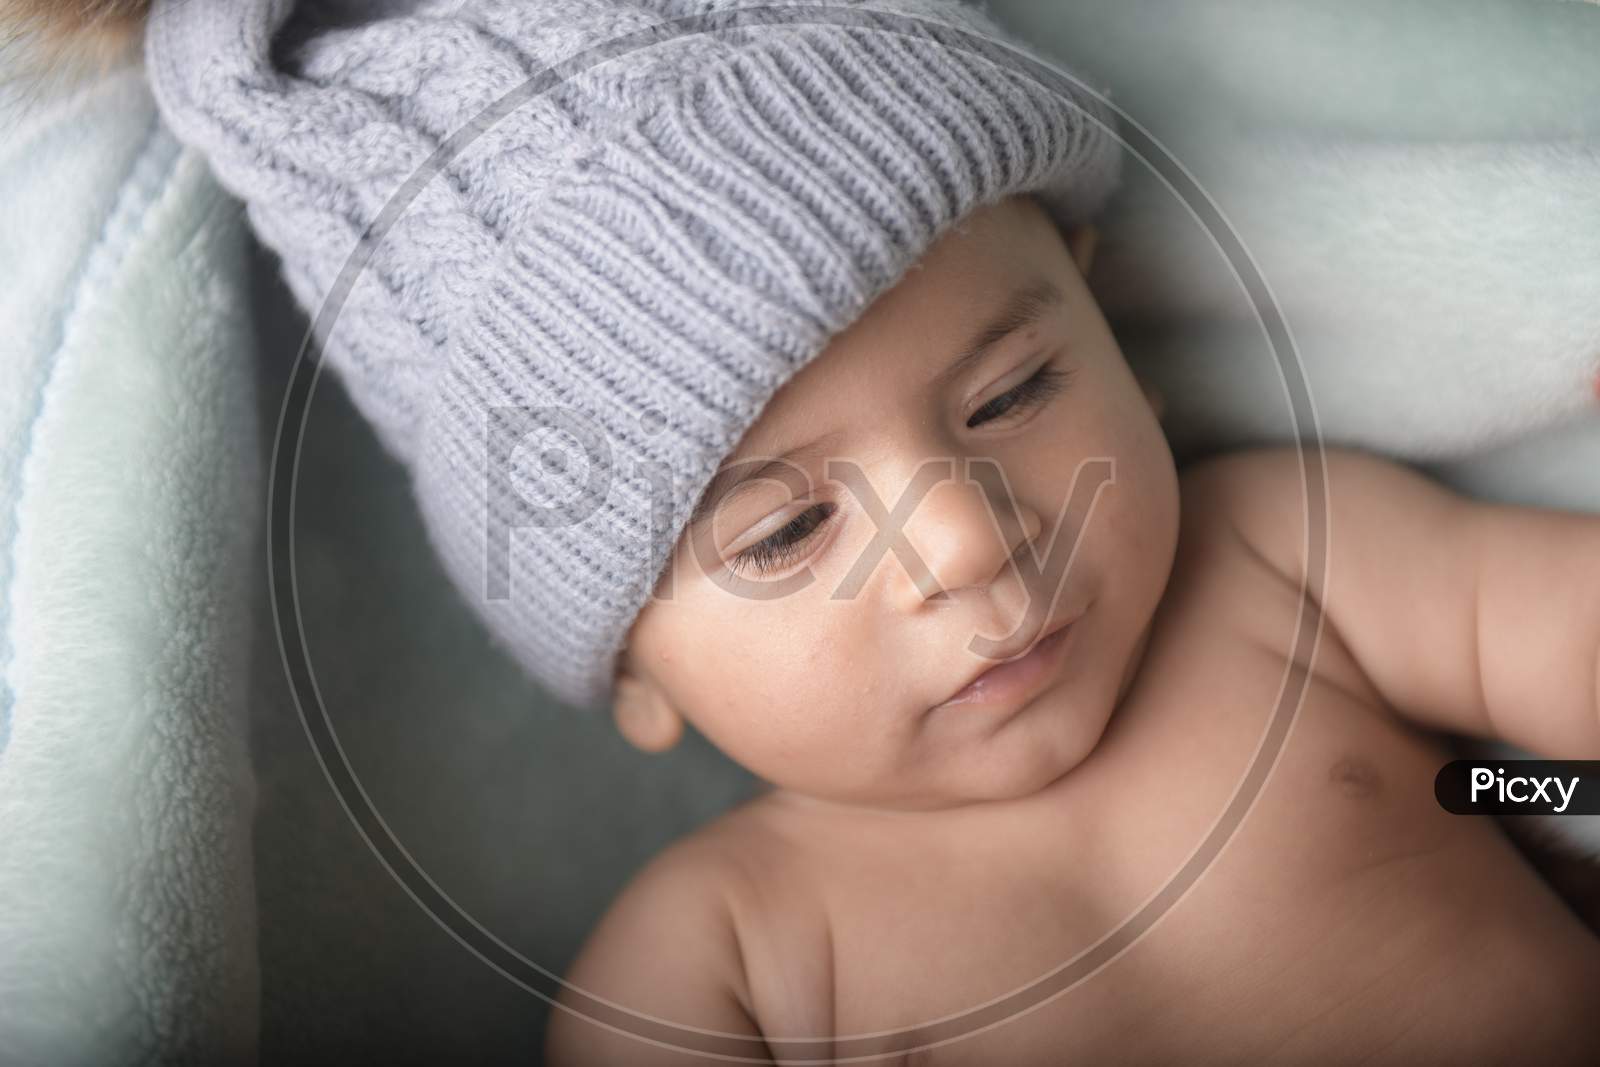 Cute Little Baby Girl Wearing Woolen Cap Face Closeup With a Smile And Innocent Expression